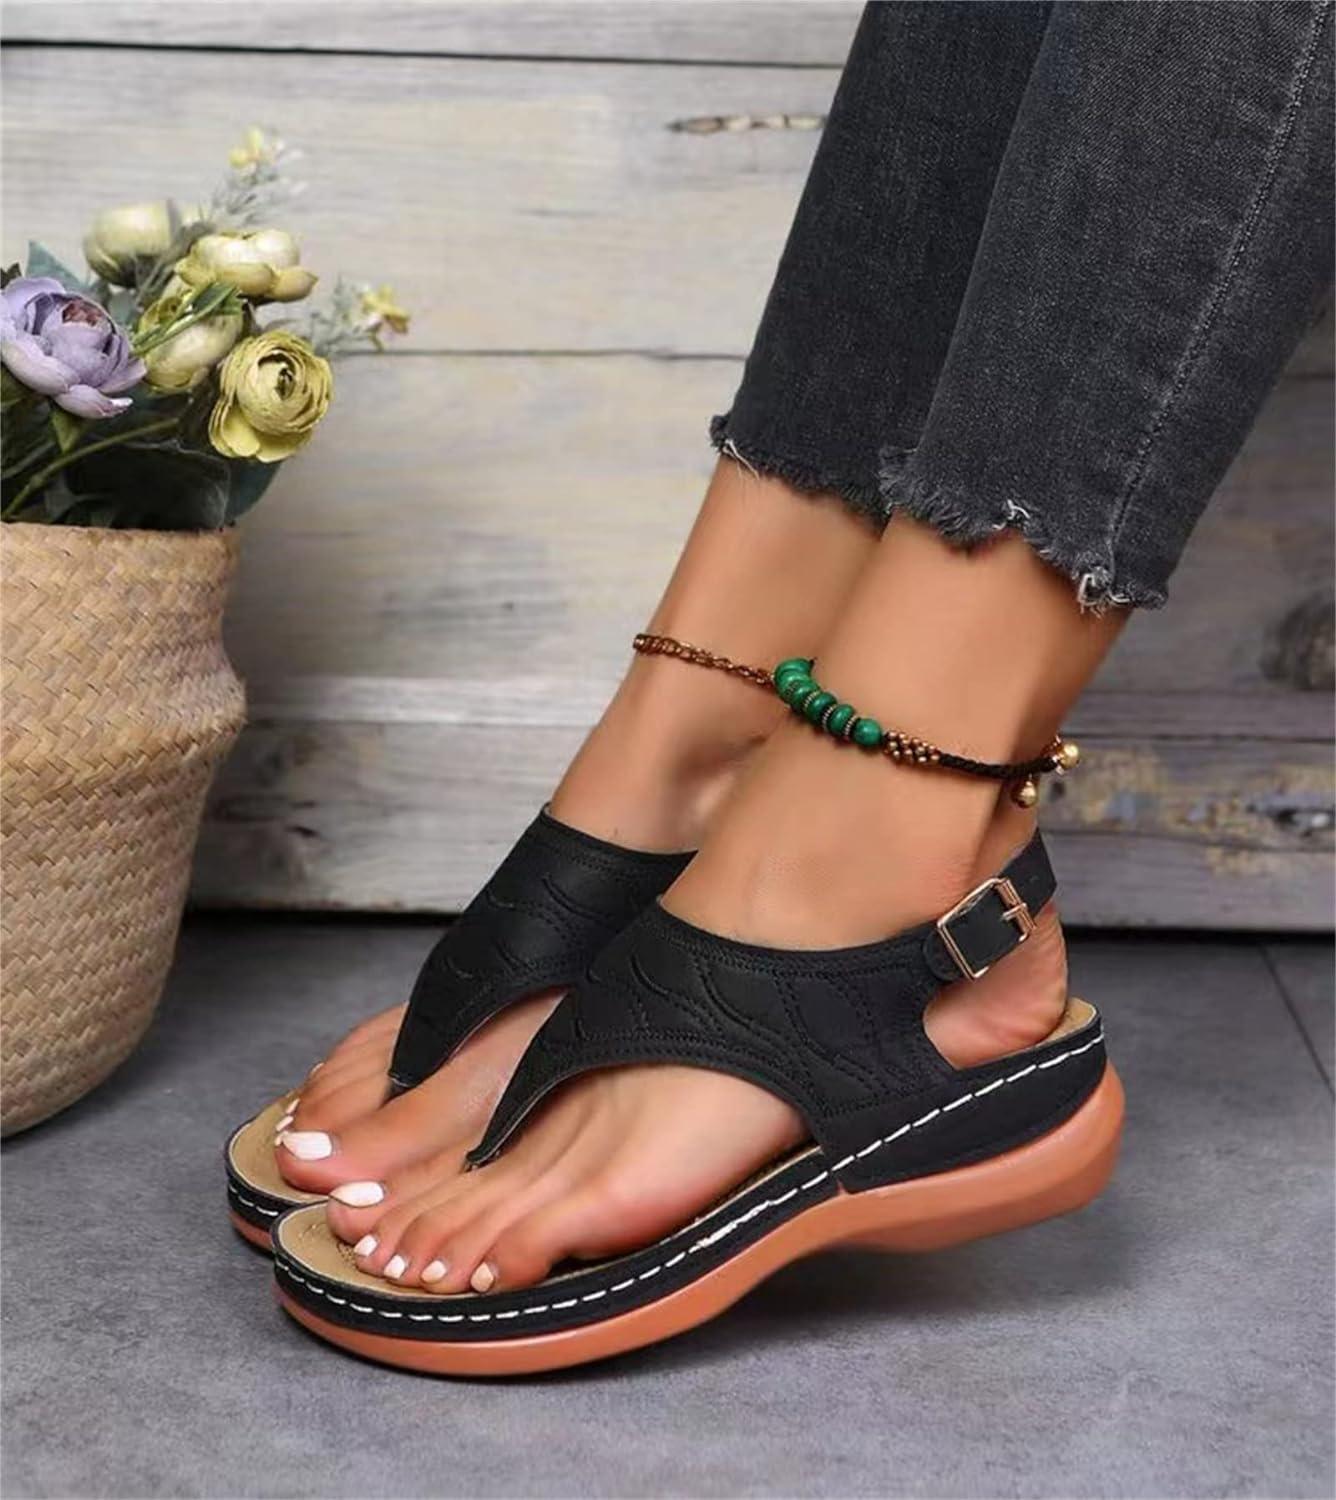 Lausiuoe Sandals Women Dressy Summer Flat Arch Support Wide Width